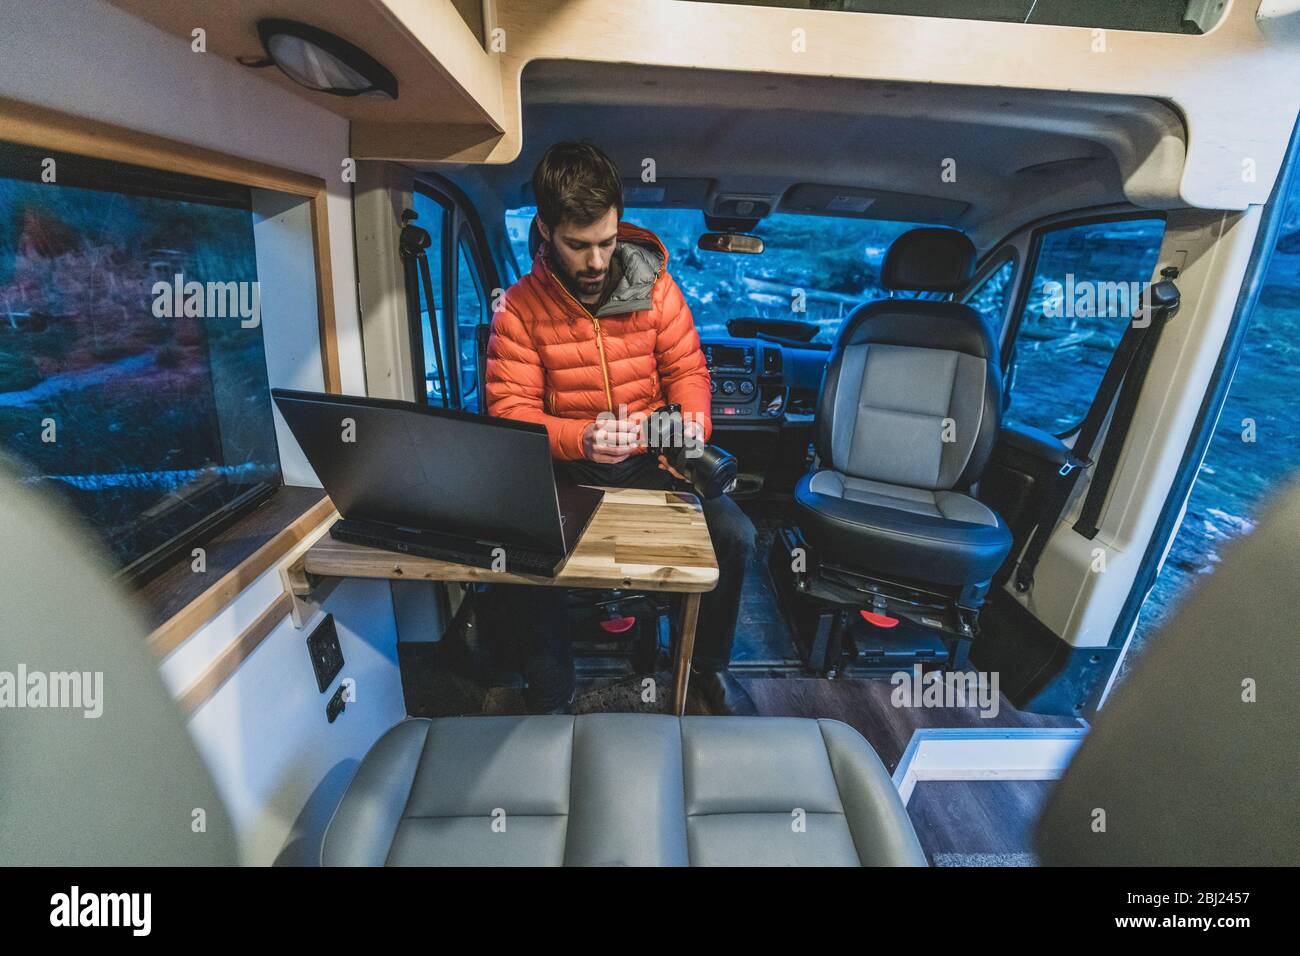 A man sitting in his campervan at a table with a laptop open looking at a camera. Stock Photo